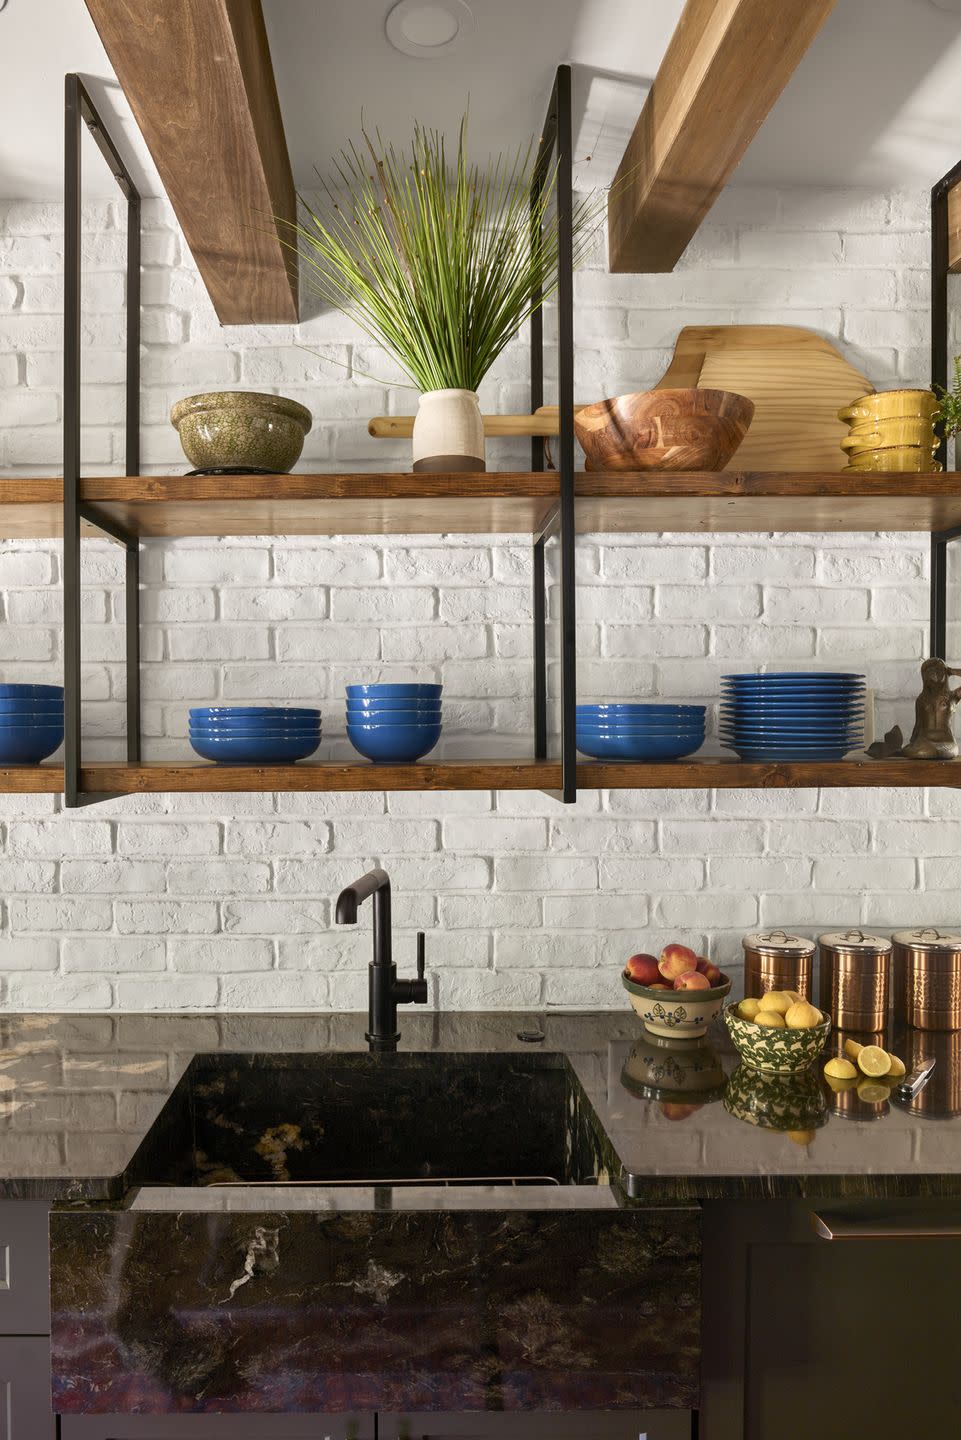 smart shelving to offset dark cabinets and counters, the team wanted the white brick walls to shine through enter custom steel and wood open shelving faucet brizo brick veneer avalon flooring discontinued